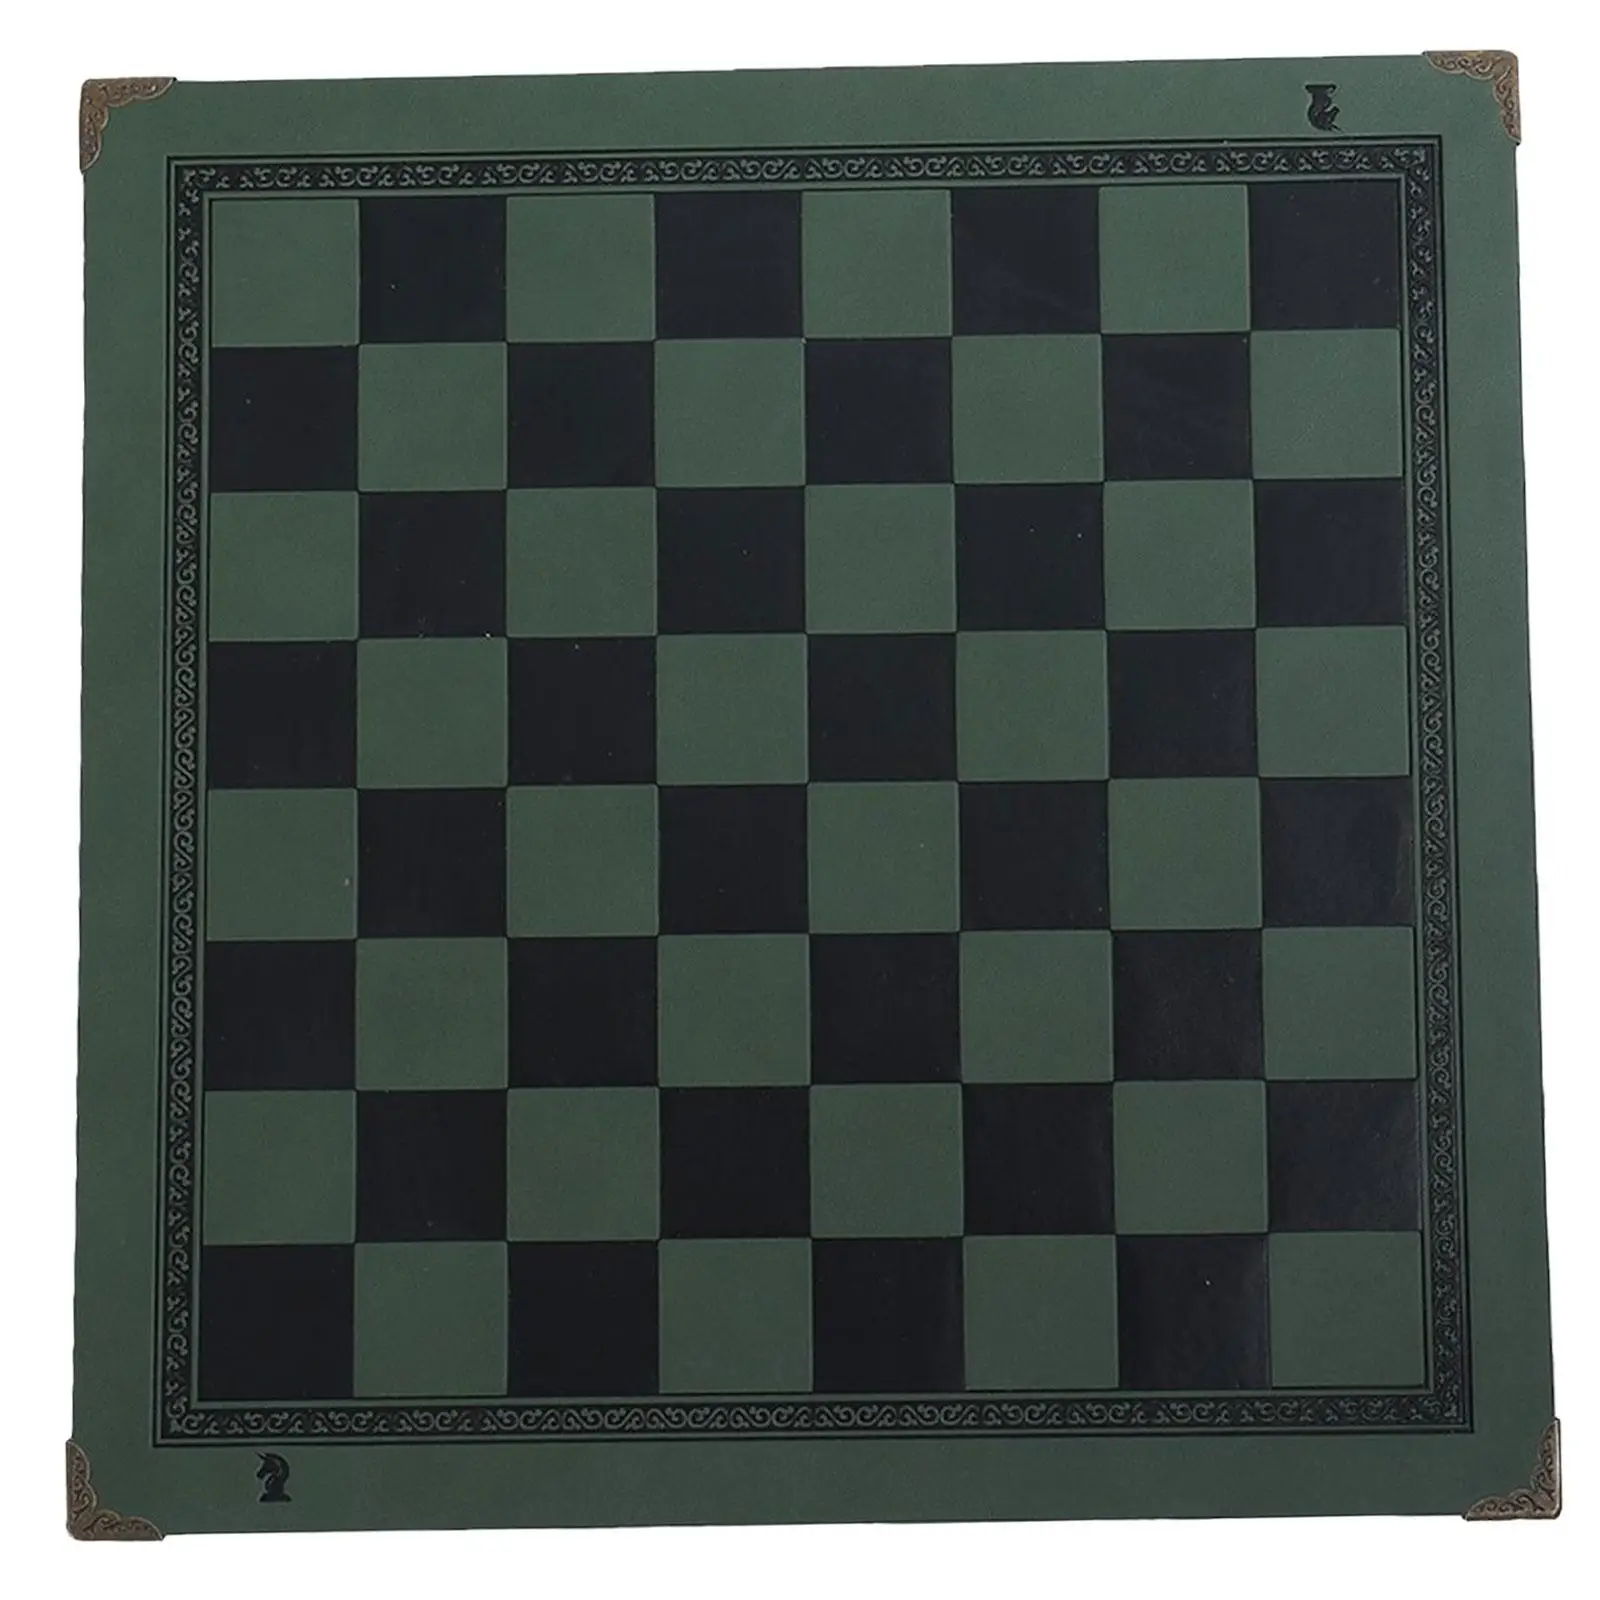 Chess Pad Mat Table Mat Chessboard Mat Placemat for Table Game Park Game Outdoor